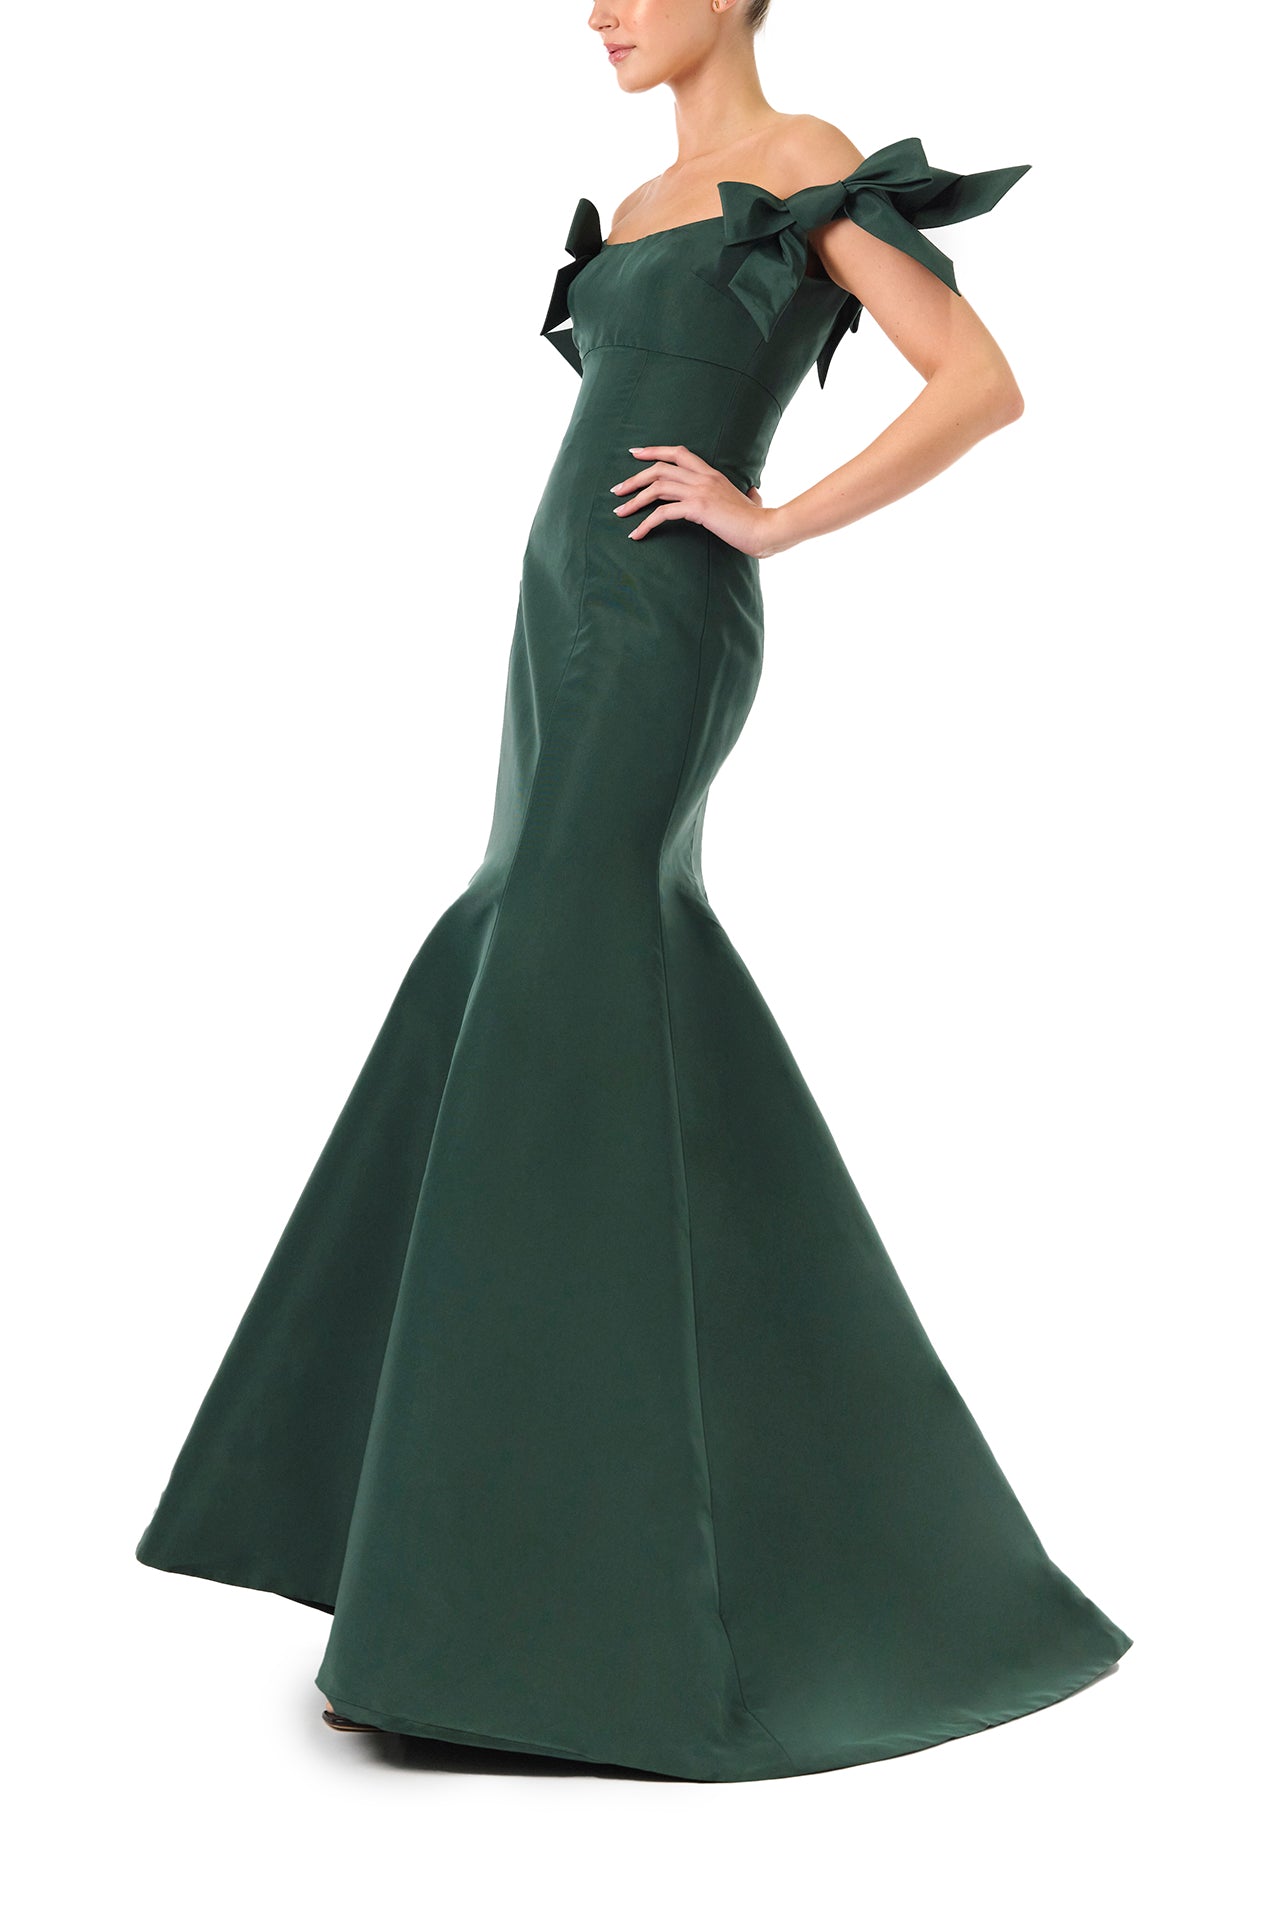 Monique Lhuillier Fall 2024 off the shoulder gown with trumpet skirt and bow sleeves in Juniper green faille fabric - left side.